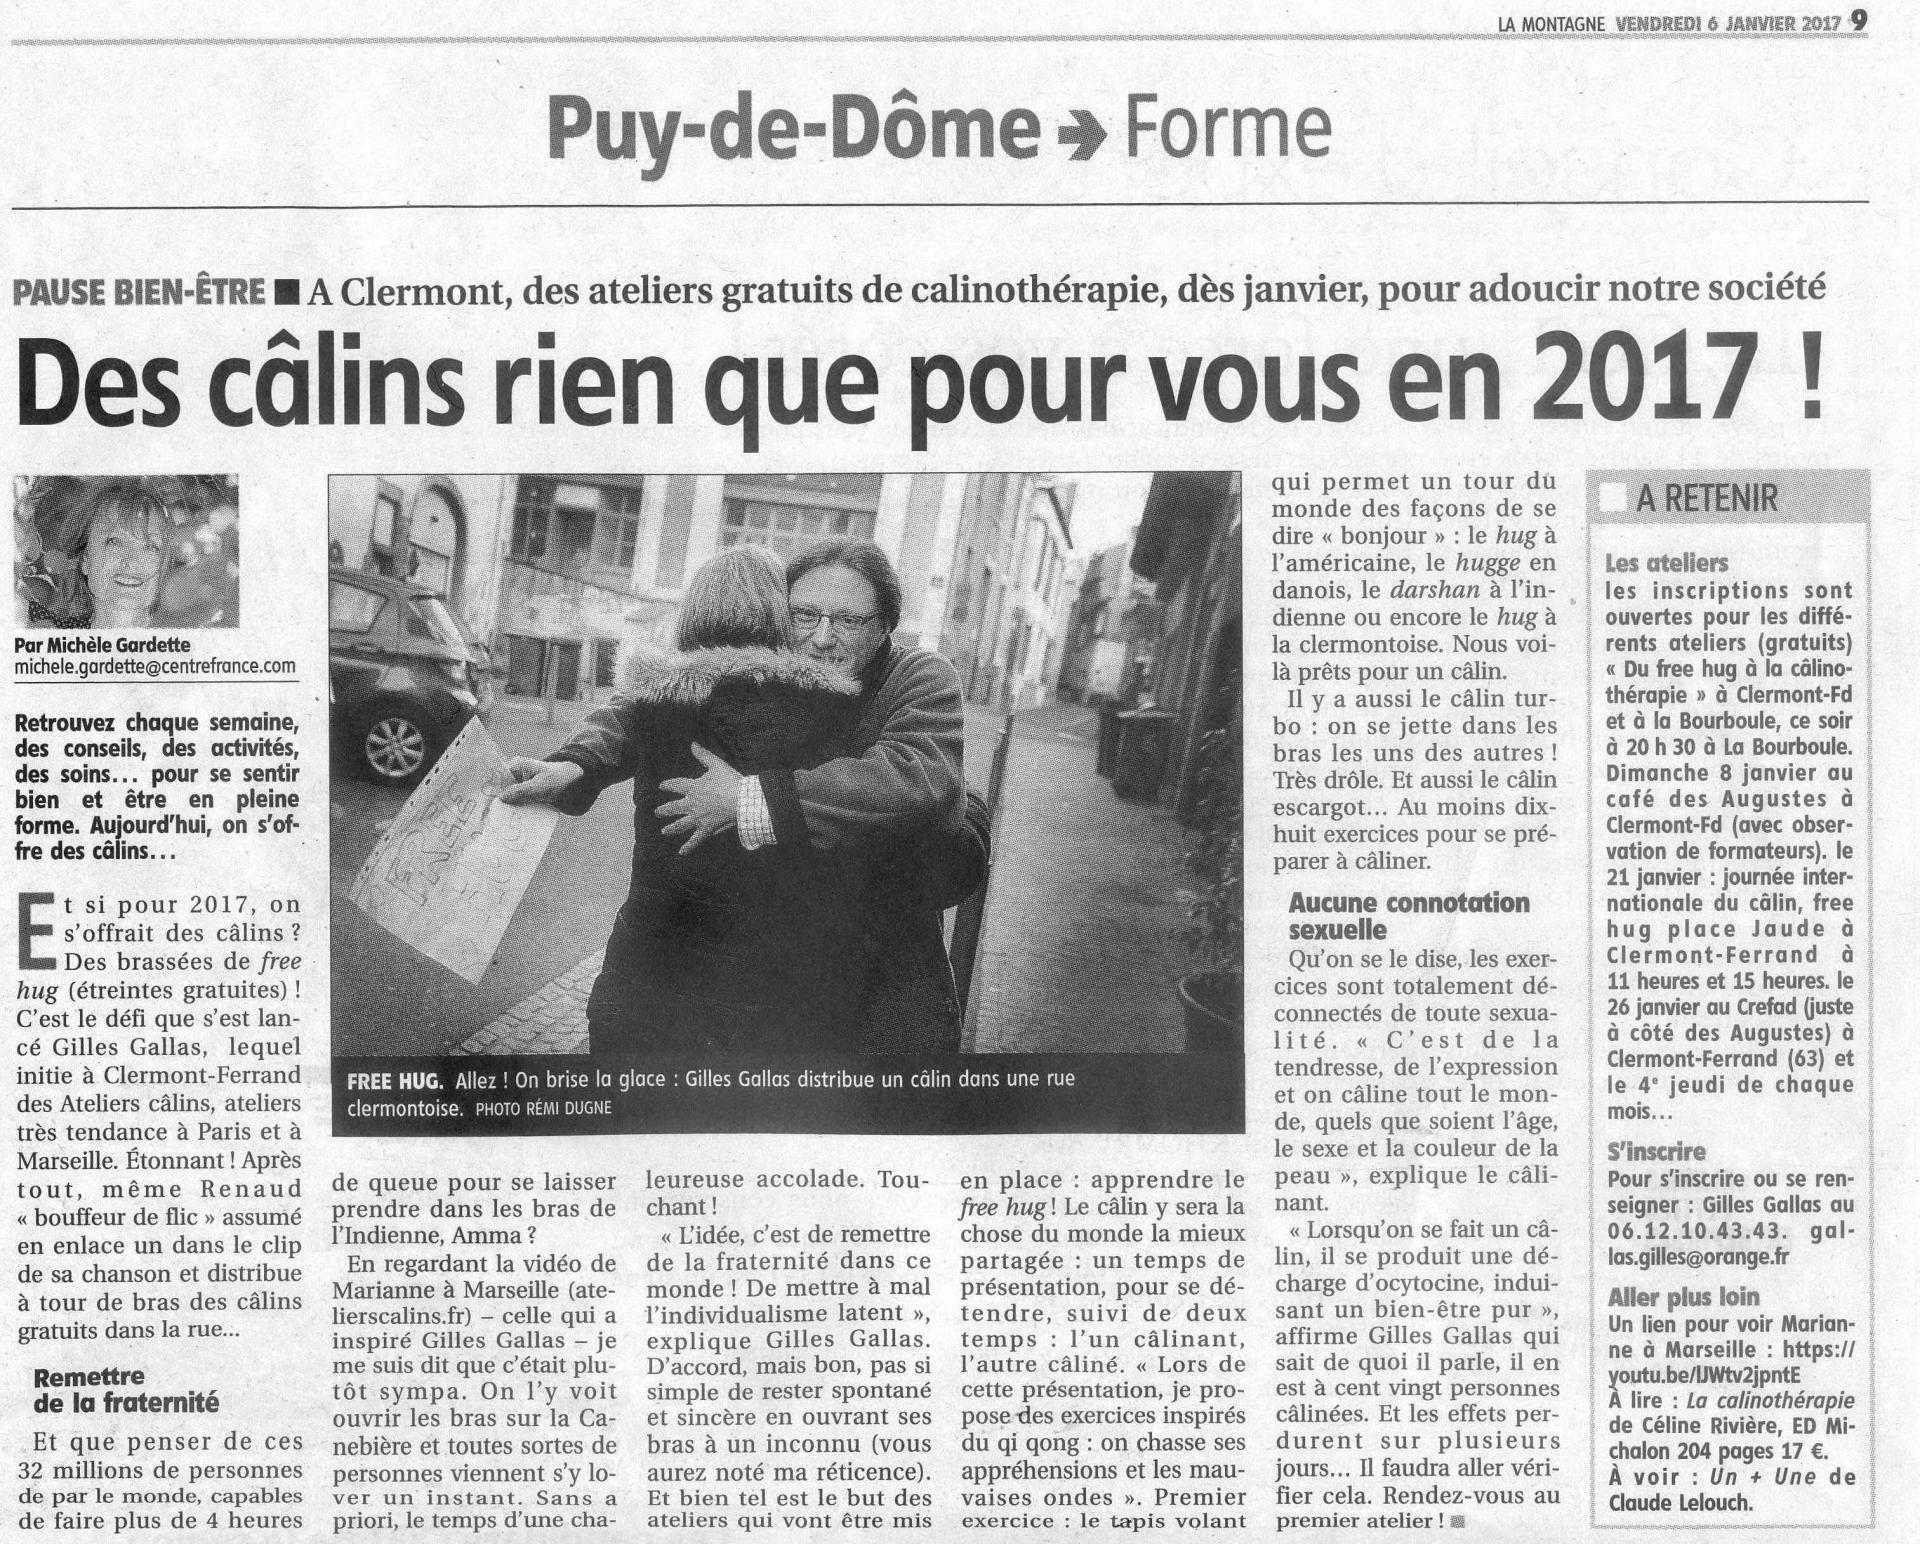 Article clermont 6 01 2017 1